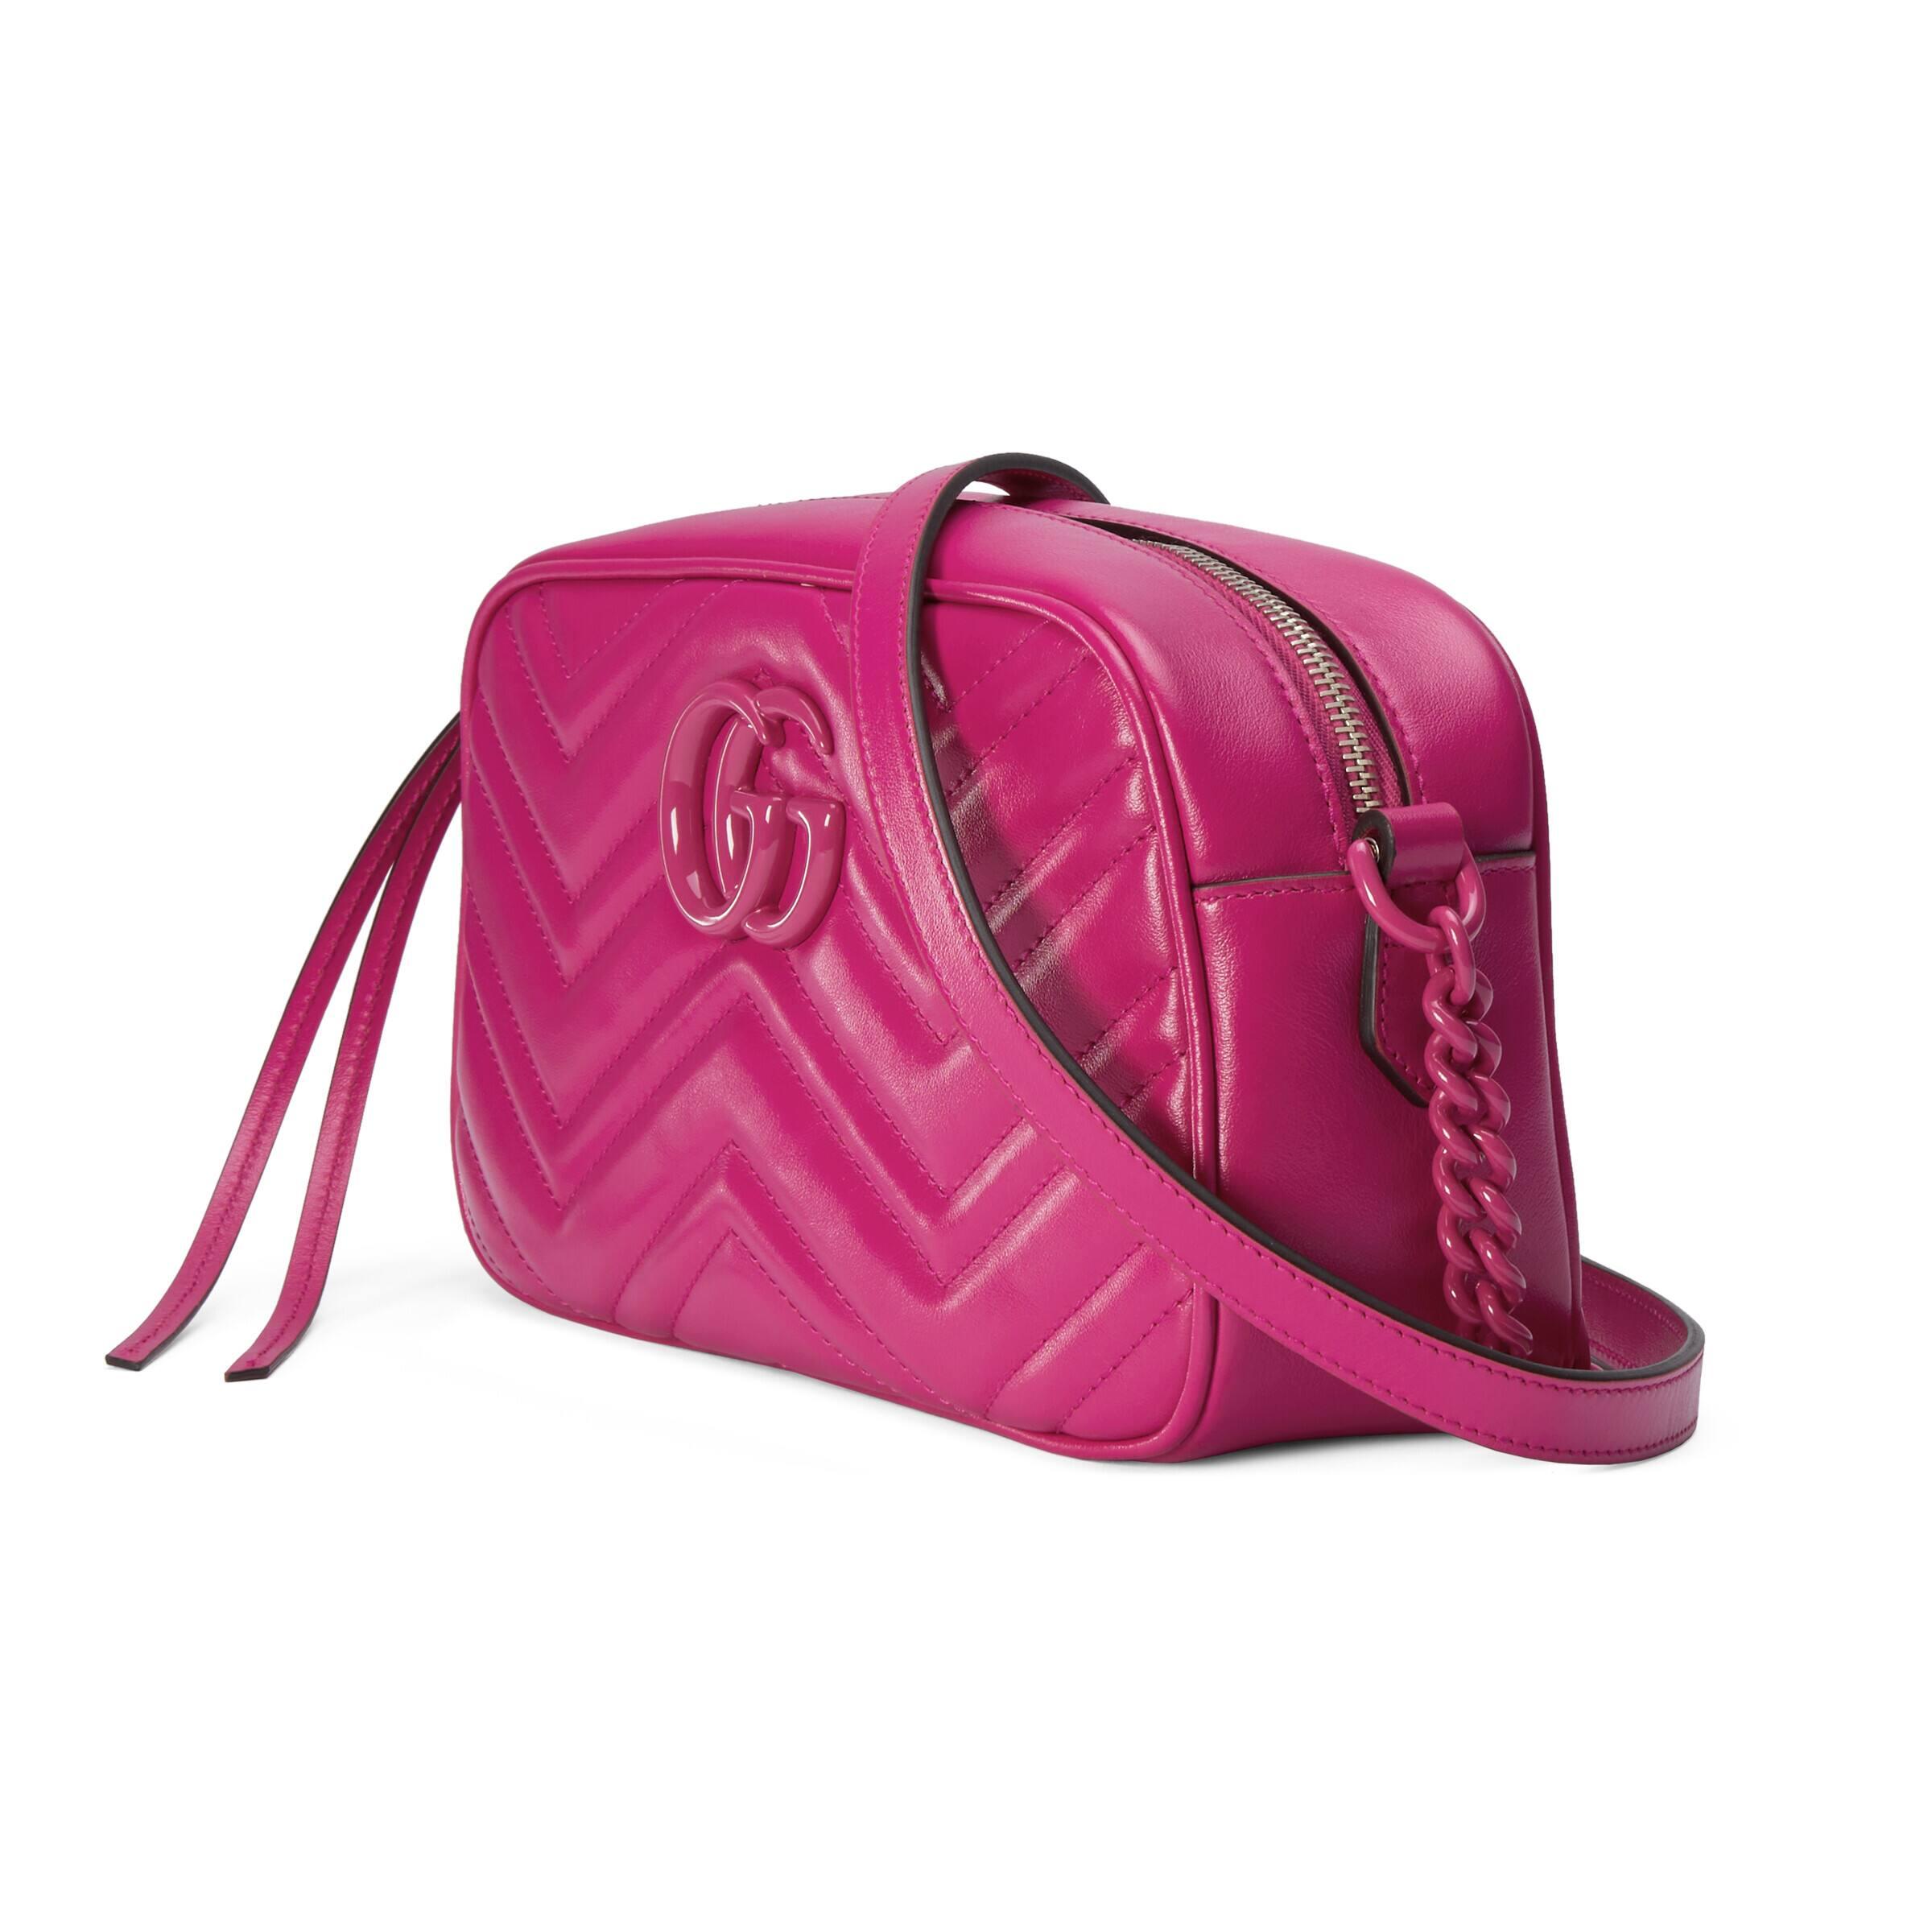 Gucci gg Marmont Matelassé Small Shoulder Bag in Pink | Lyst